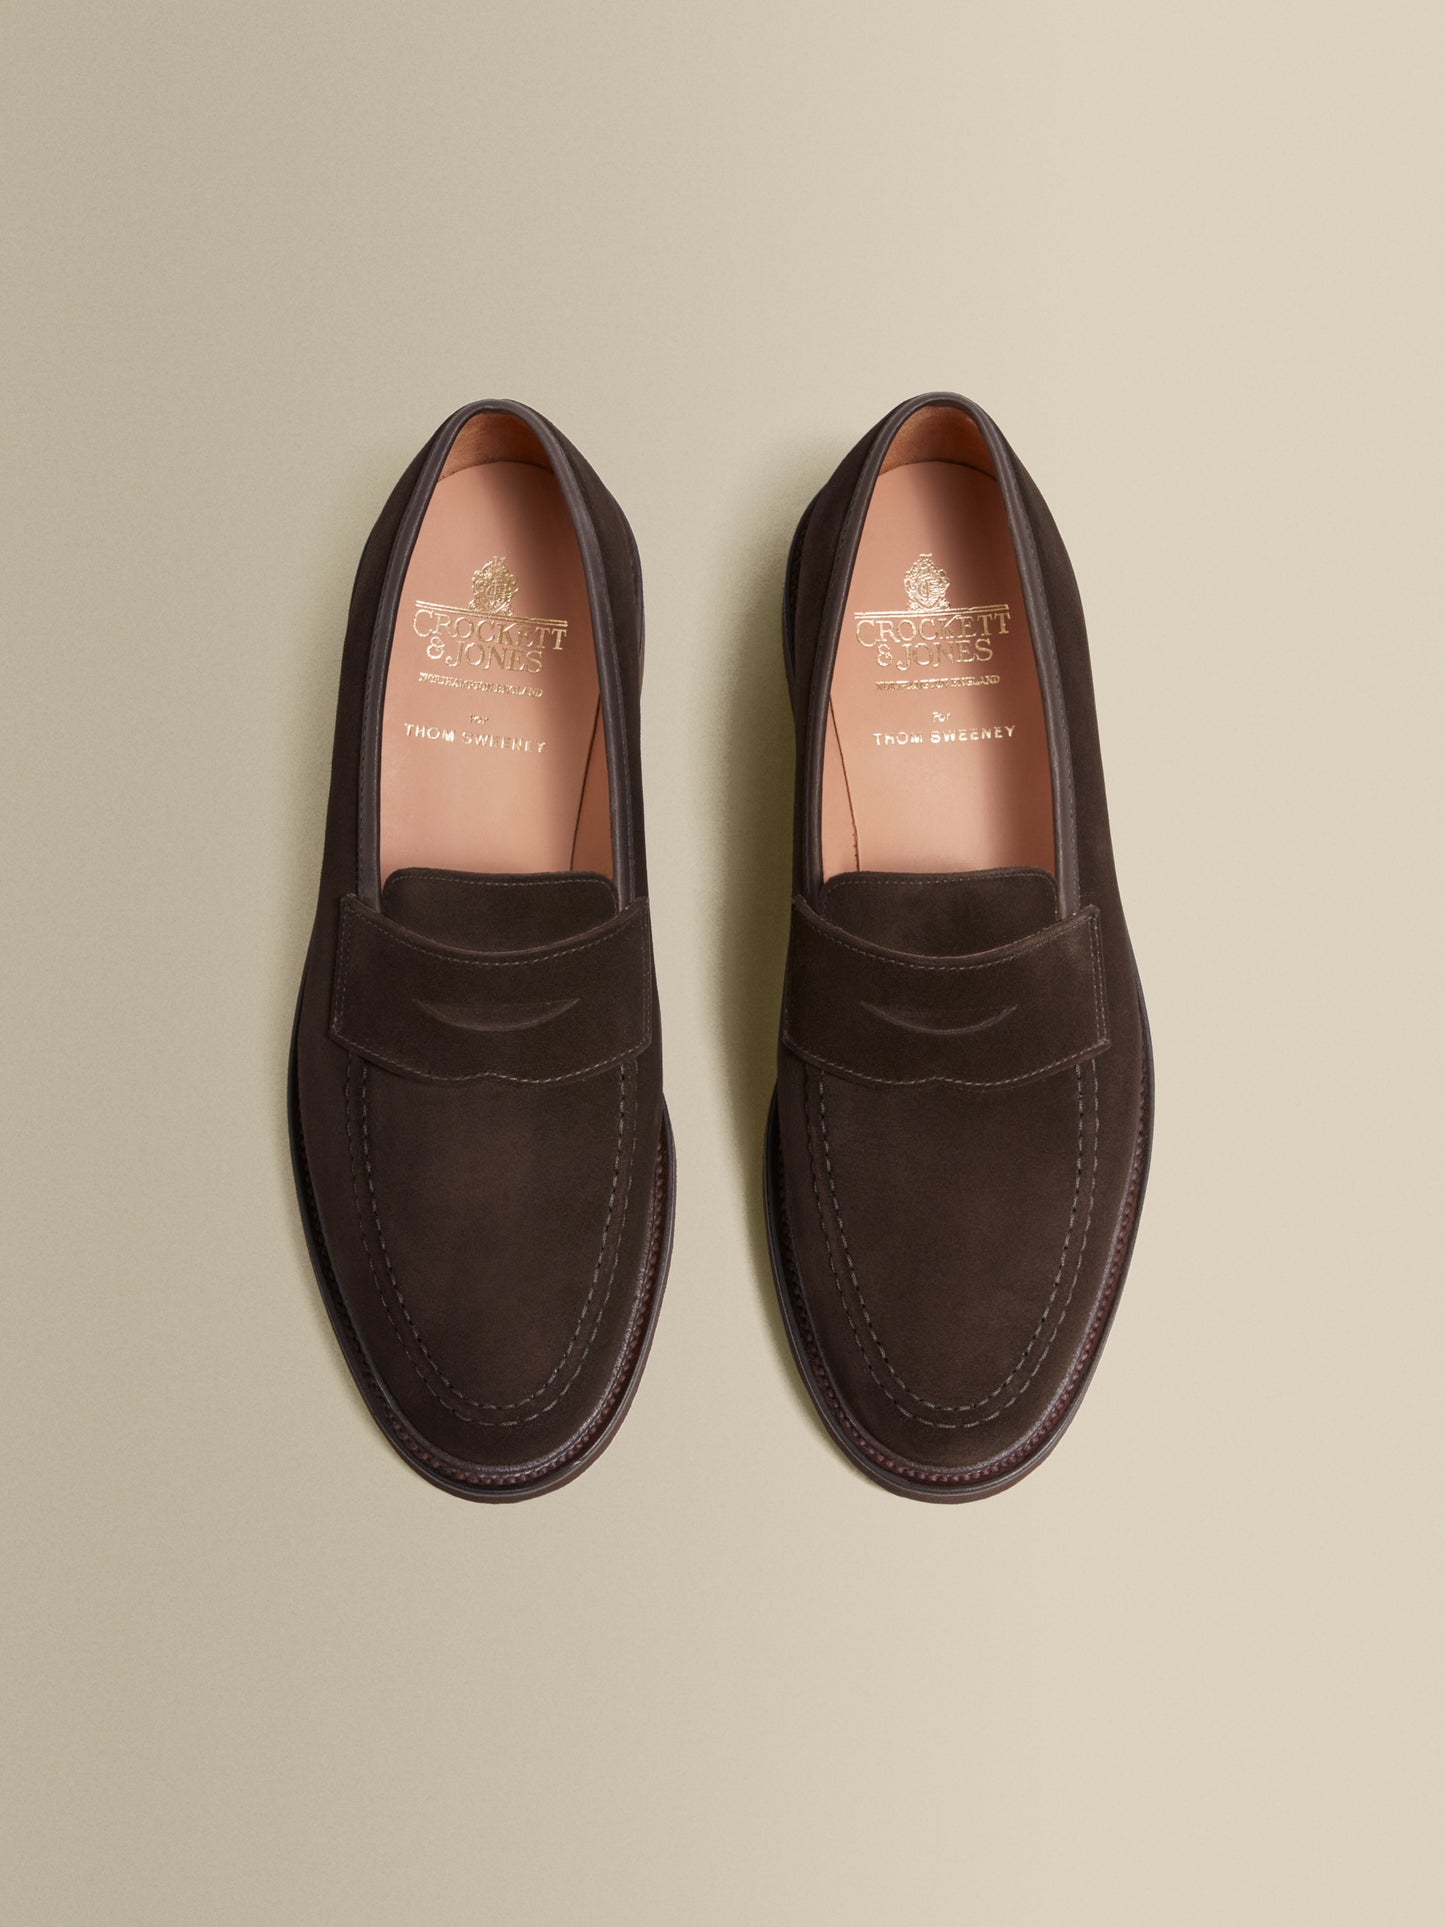 Calf Suede Penny Loafer Shoes Brown Product Image Overhead